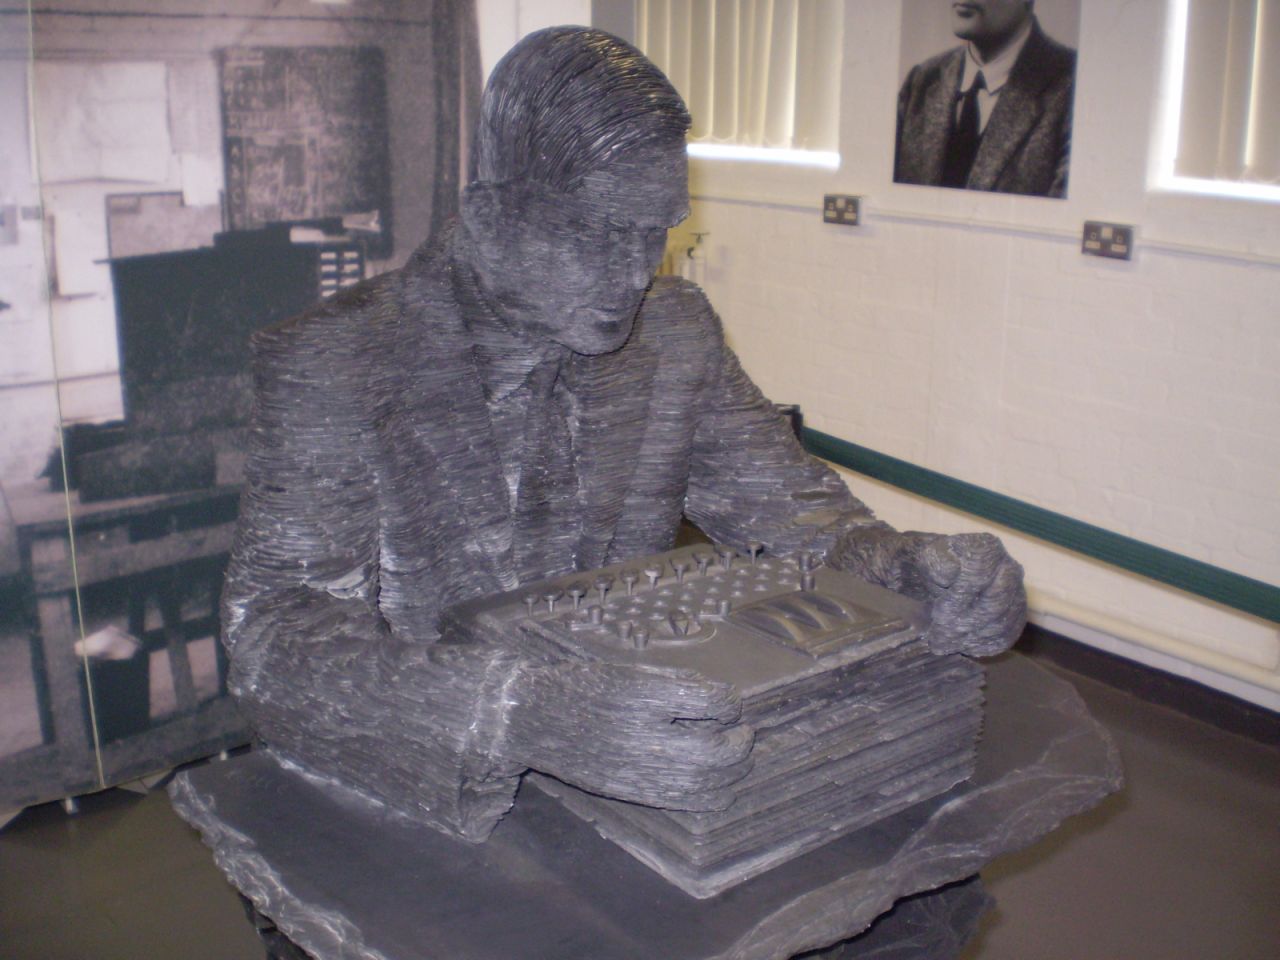 The Real Bletchley Park, Where Alan Turing Worked [Gallery]